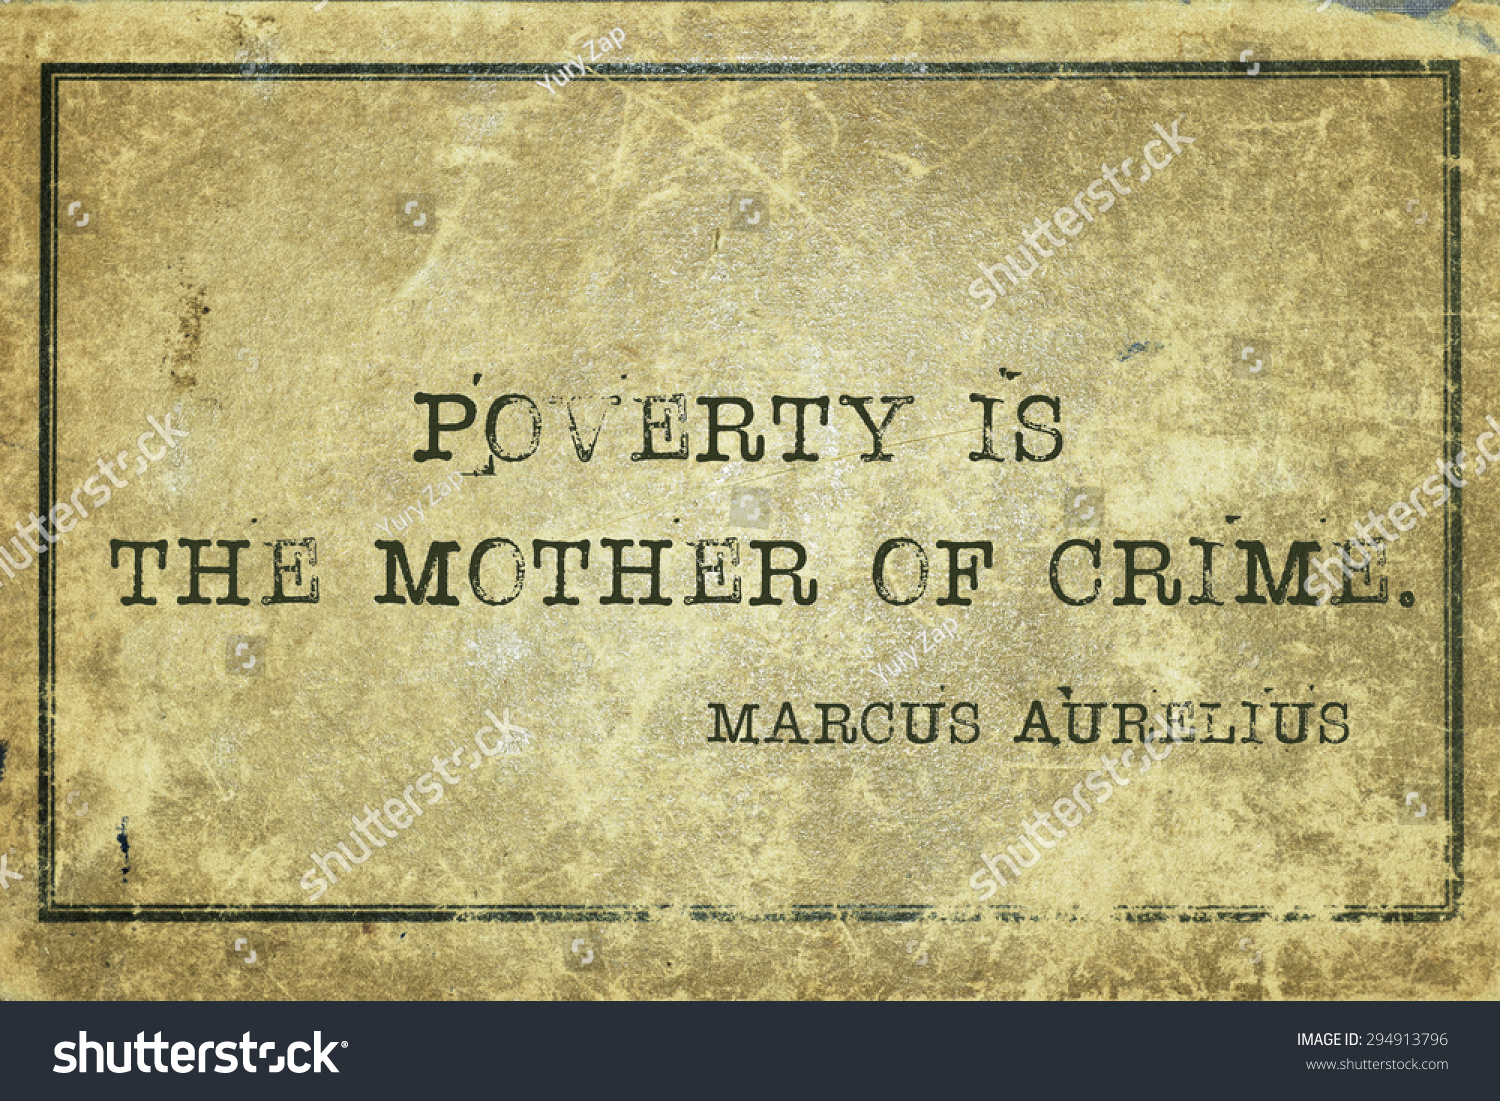 poverty is the mother of crime